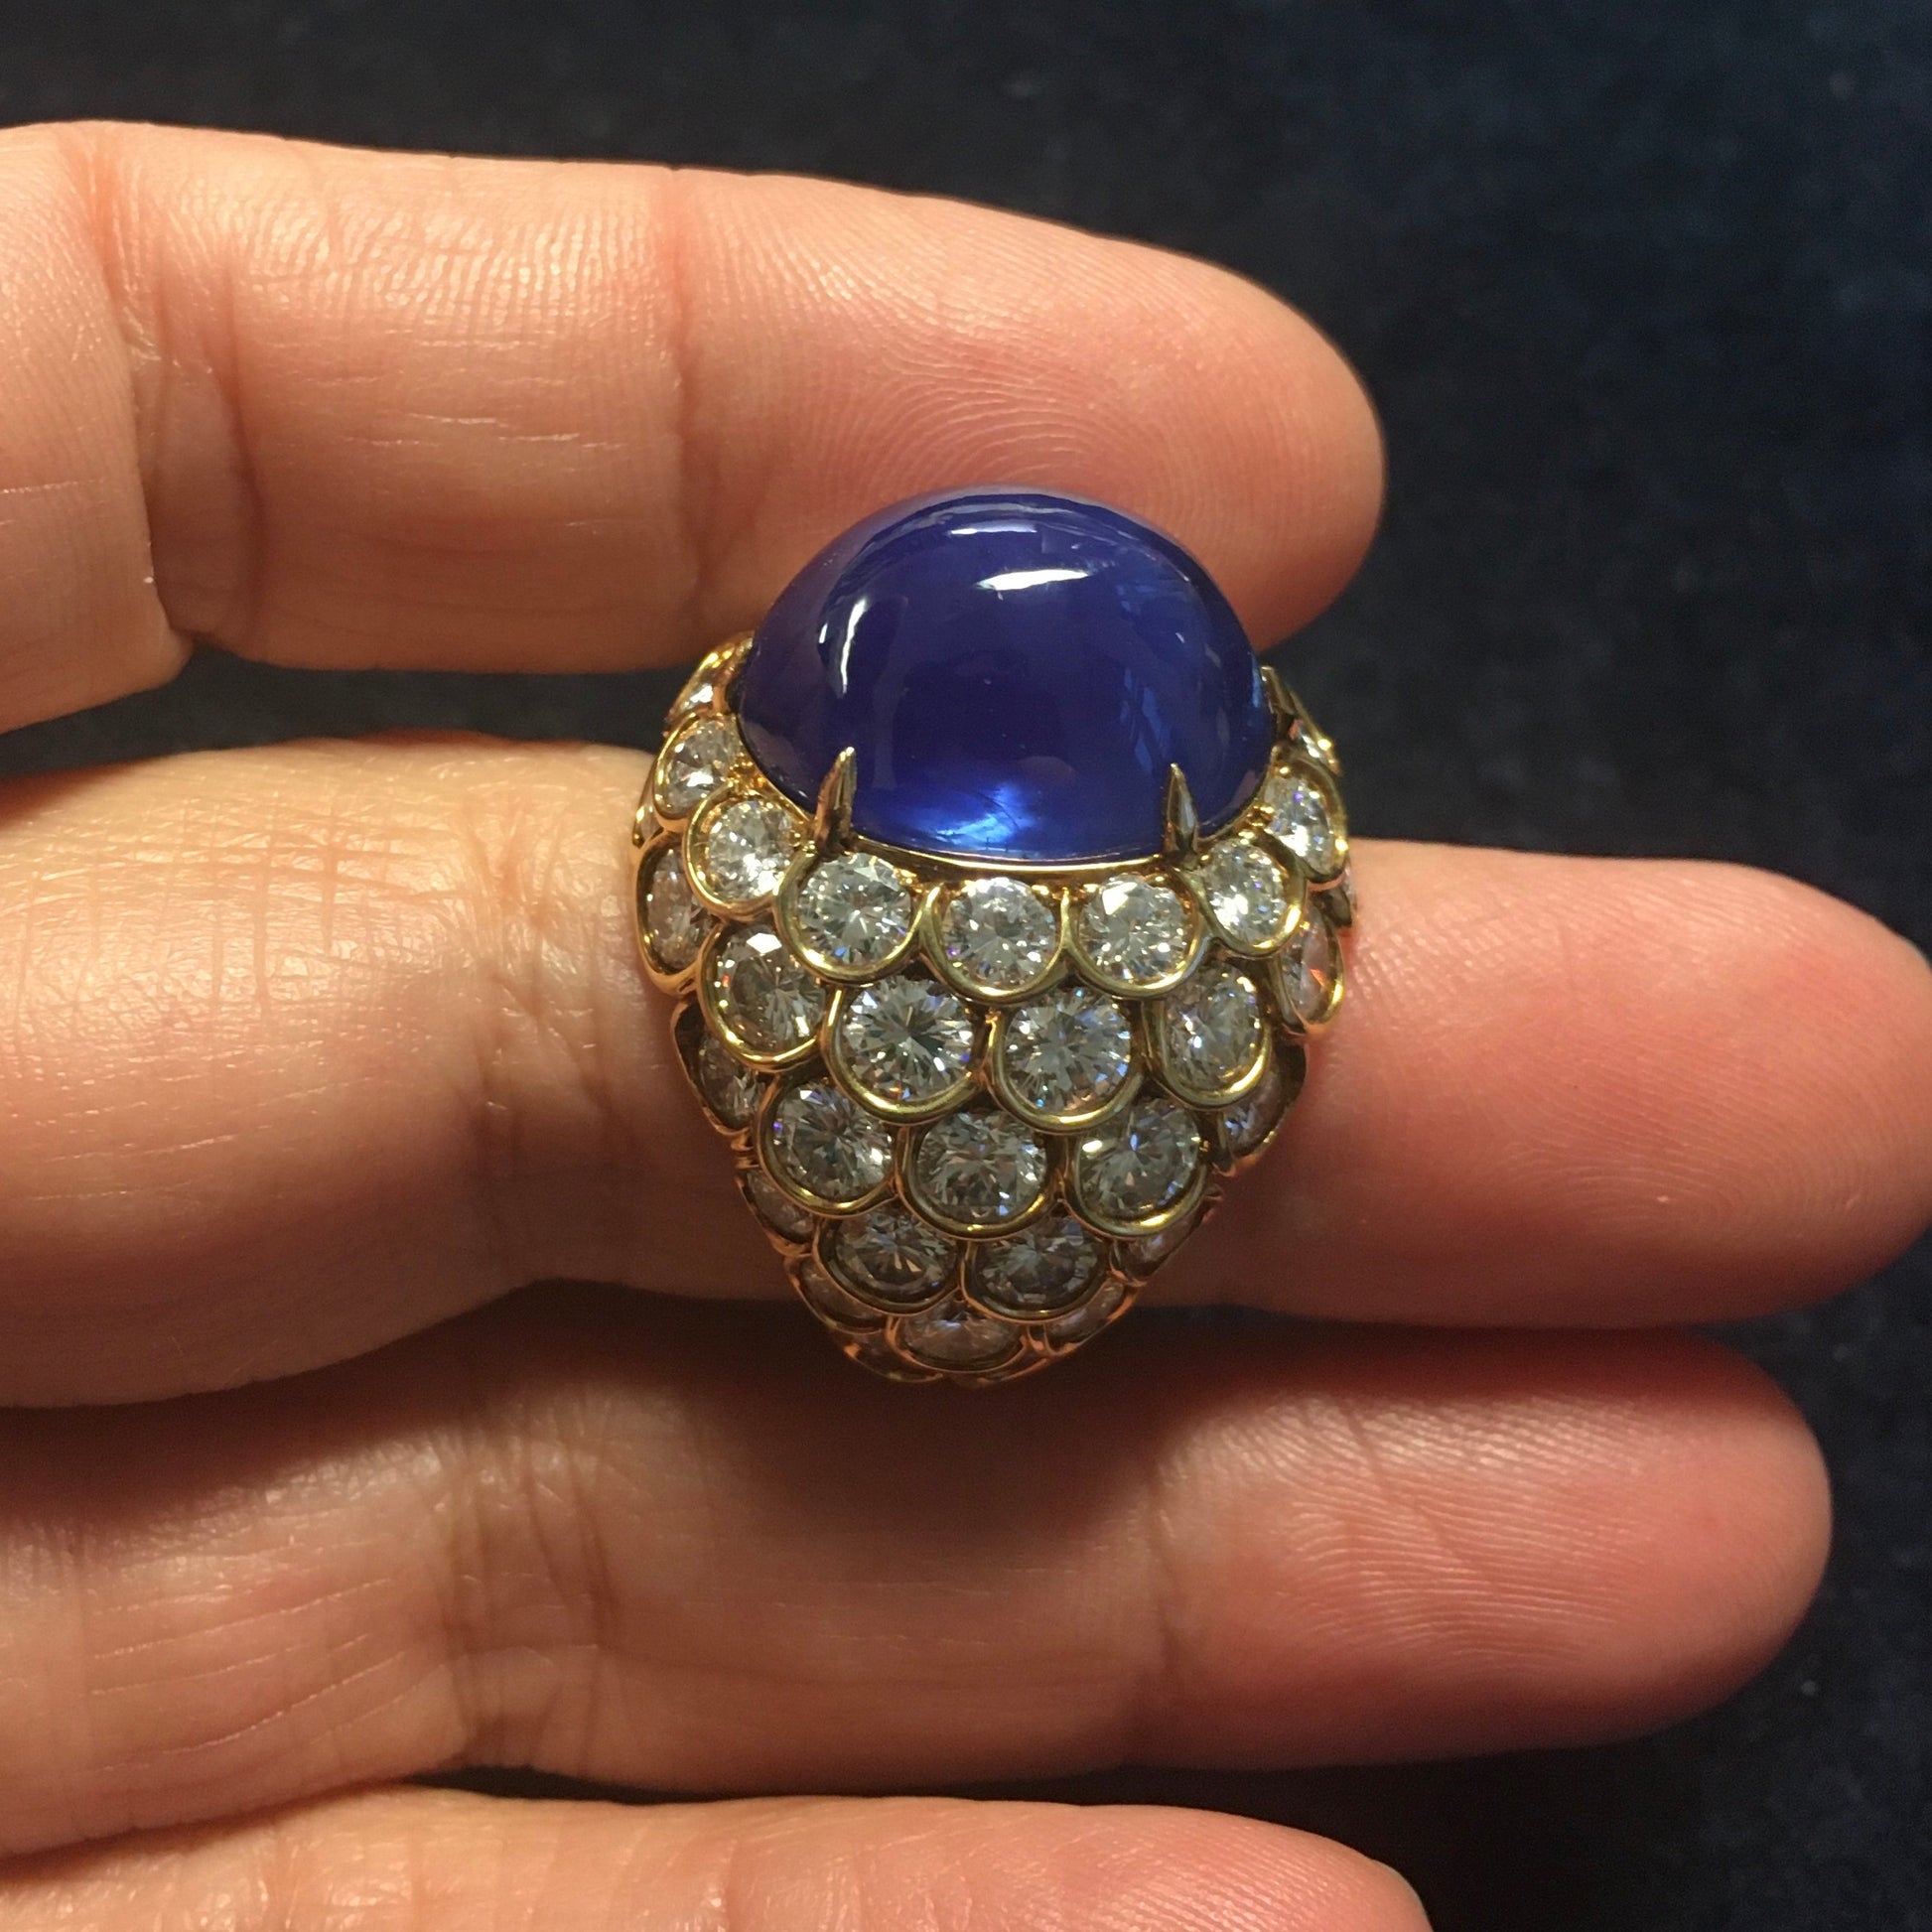 French 1960s 18KT Yellow Gold Unheated Blue Sapphire & Diamond Ring on finger